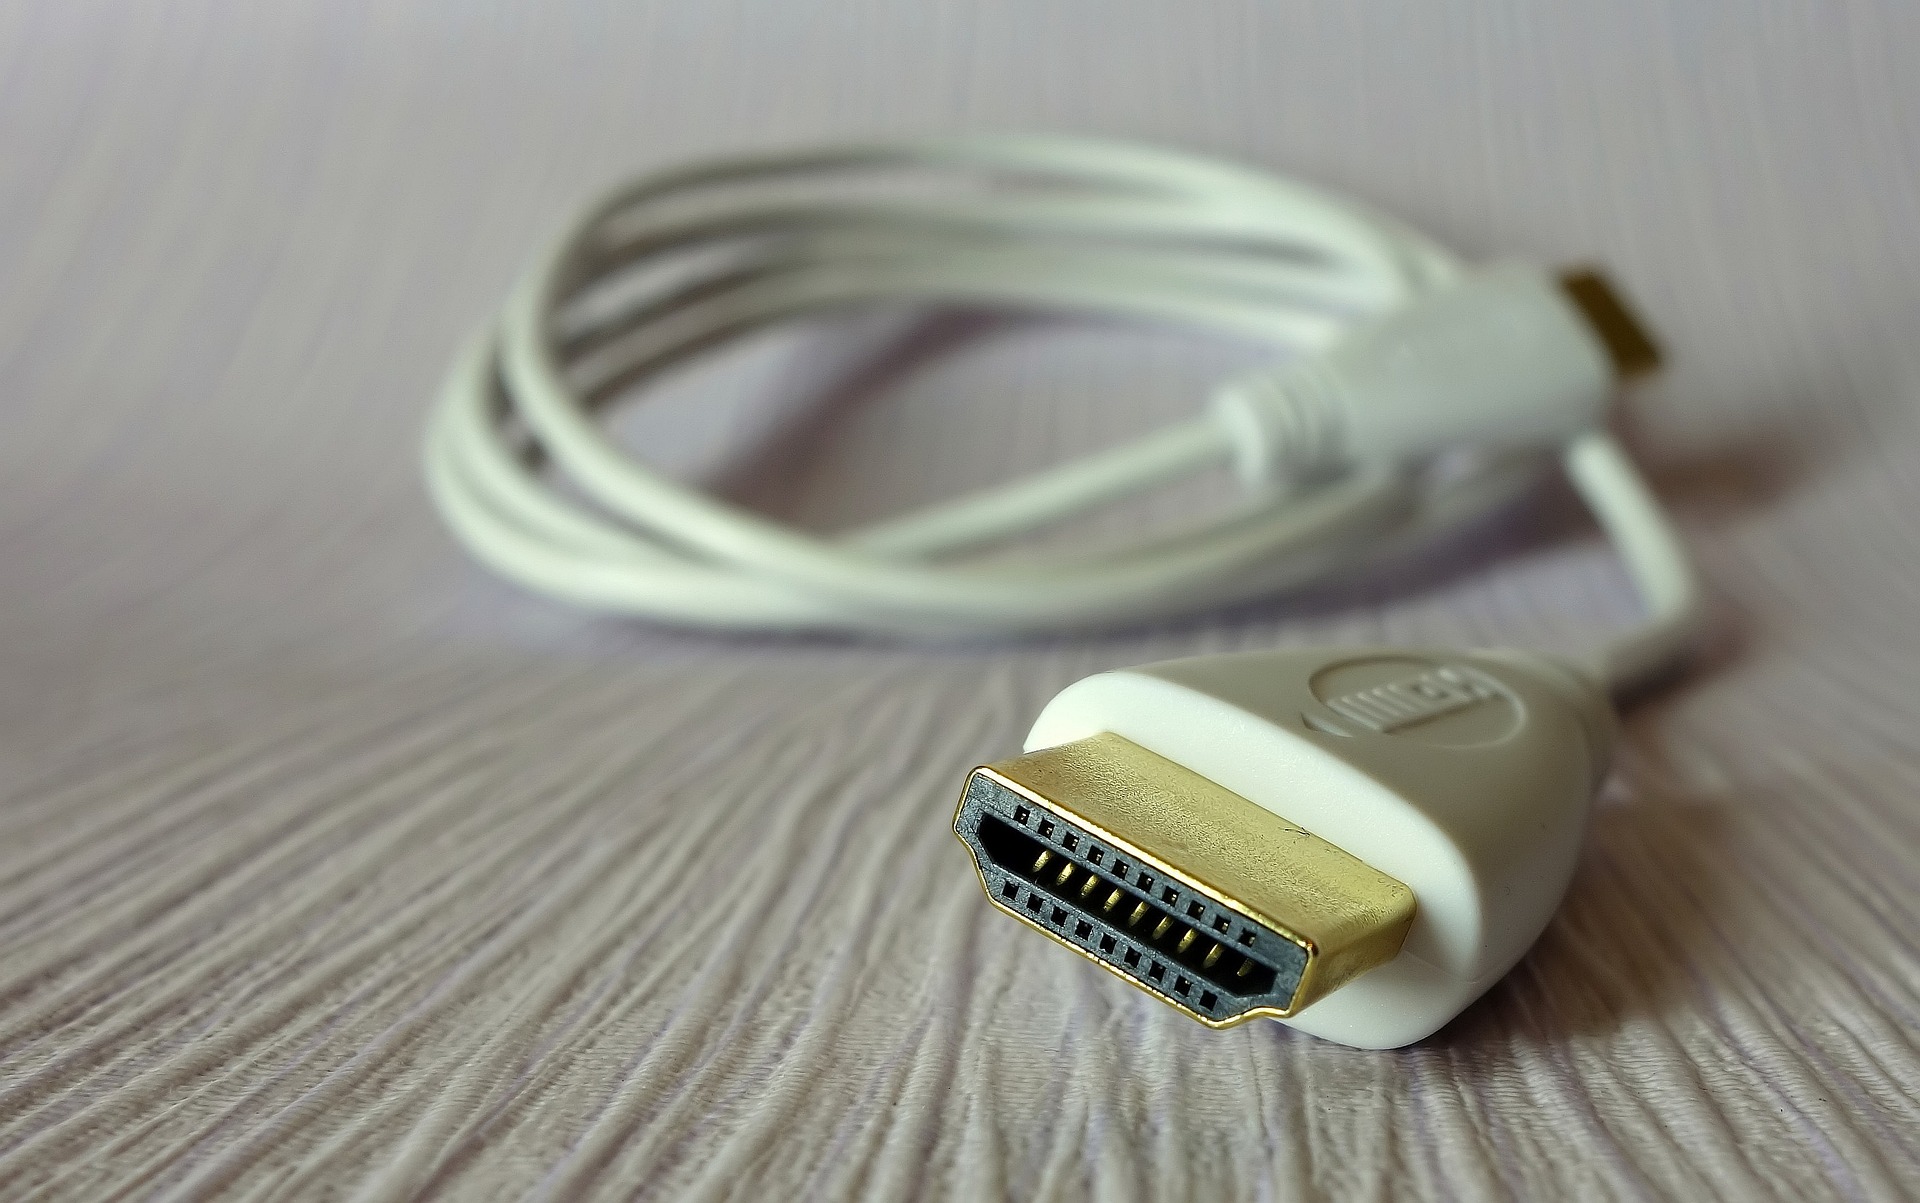 Check that your HDMI cable is properly connected